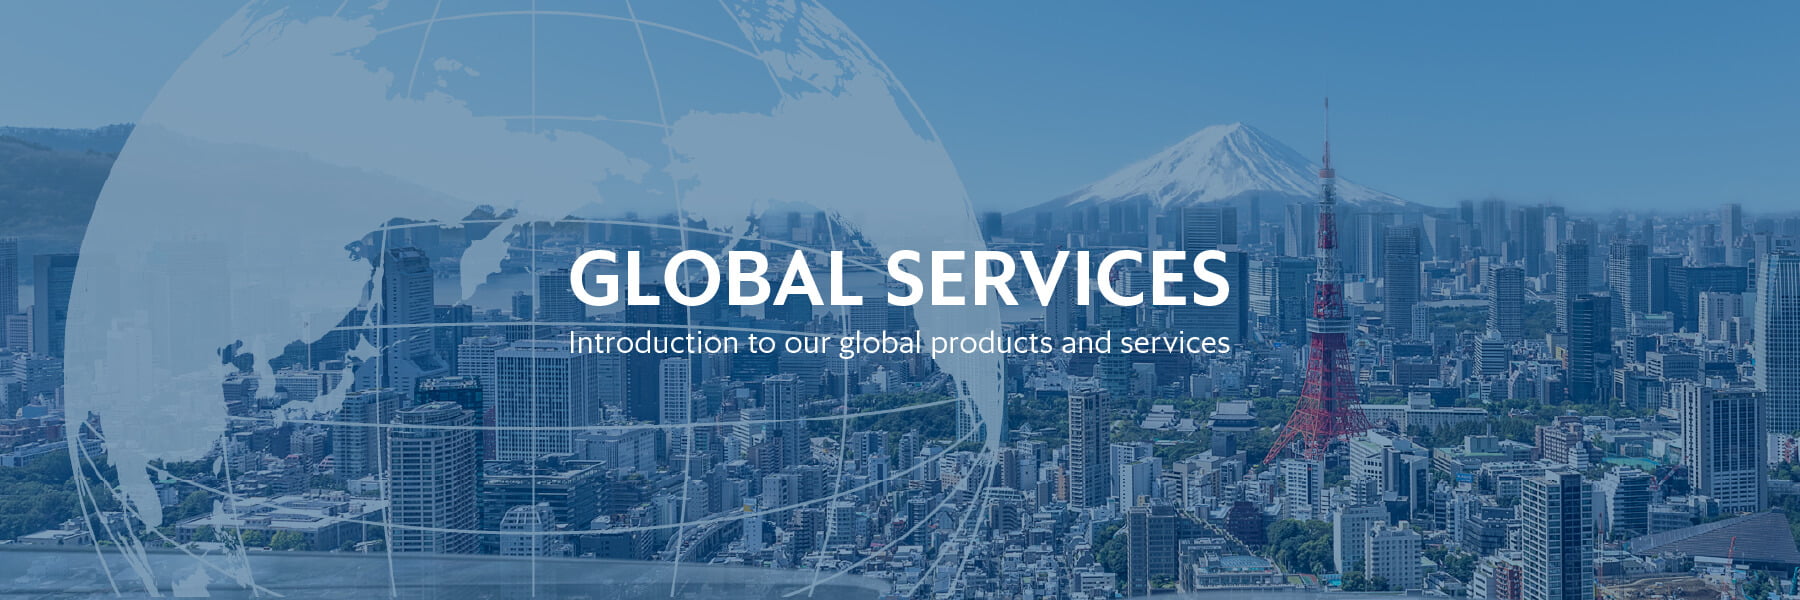 GLOBAL SERVICES Introduction to our global products and services